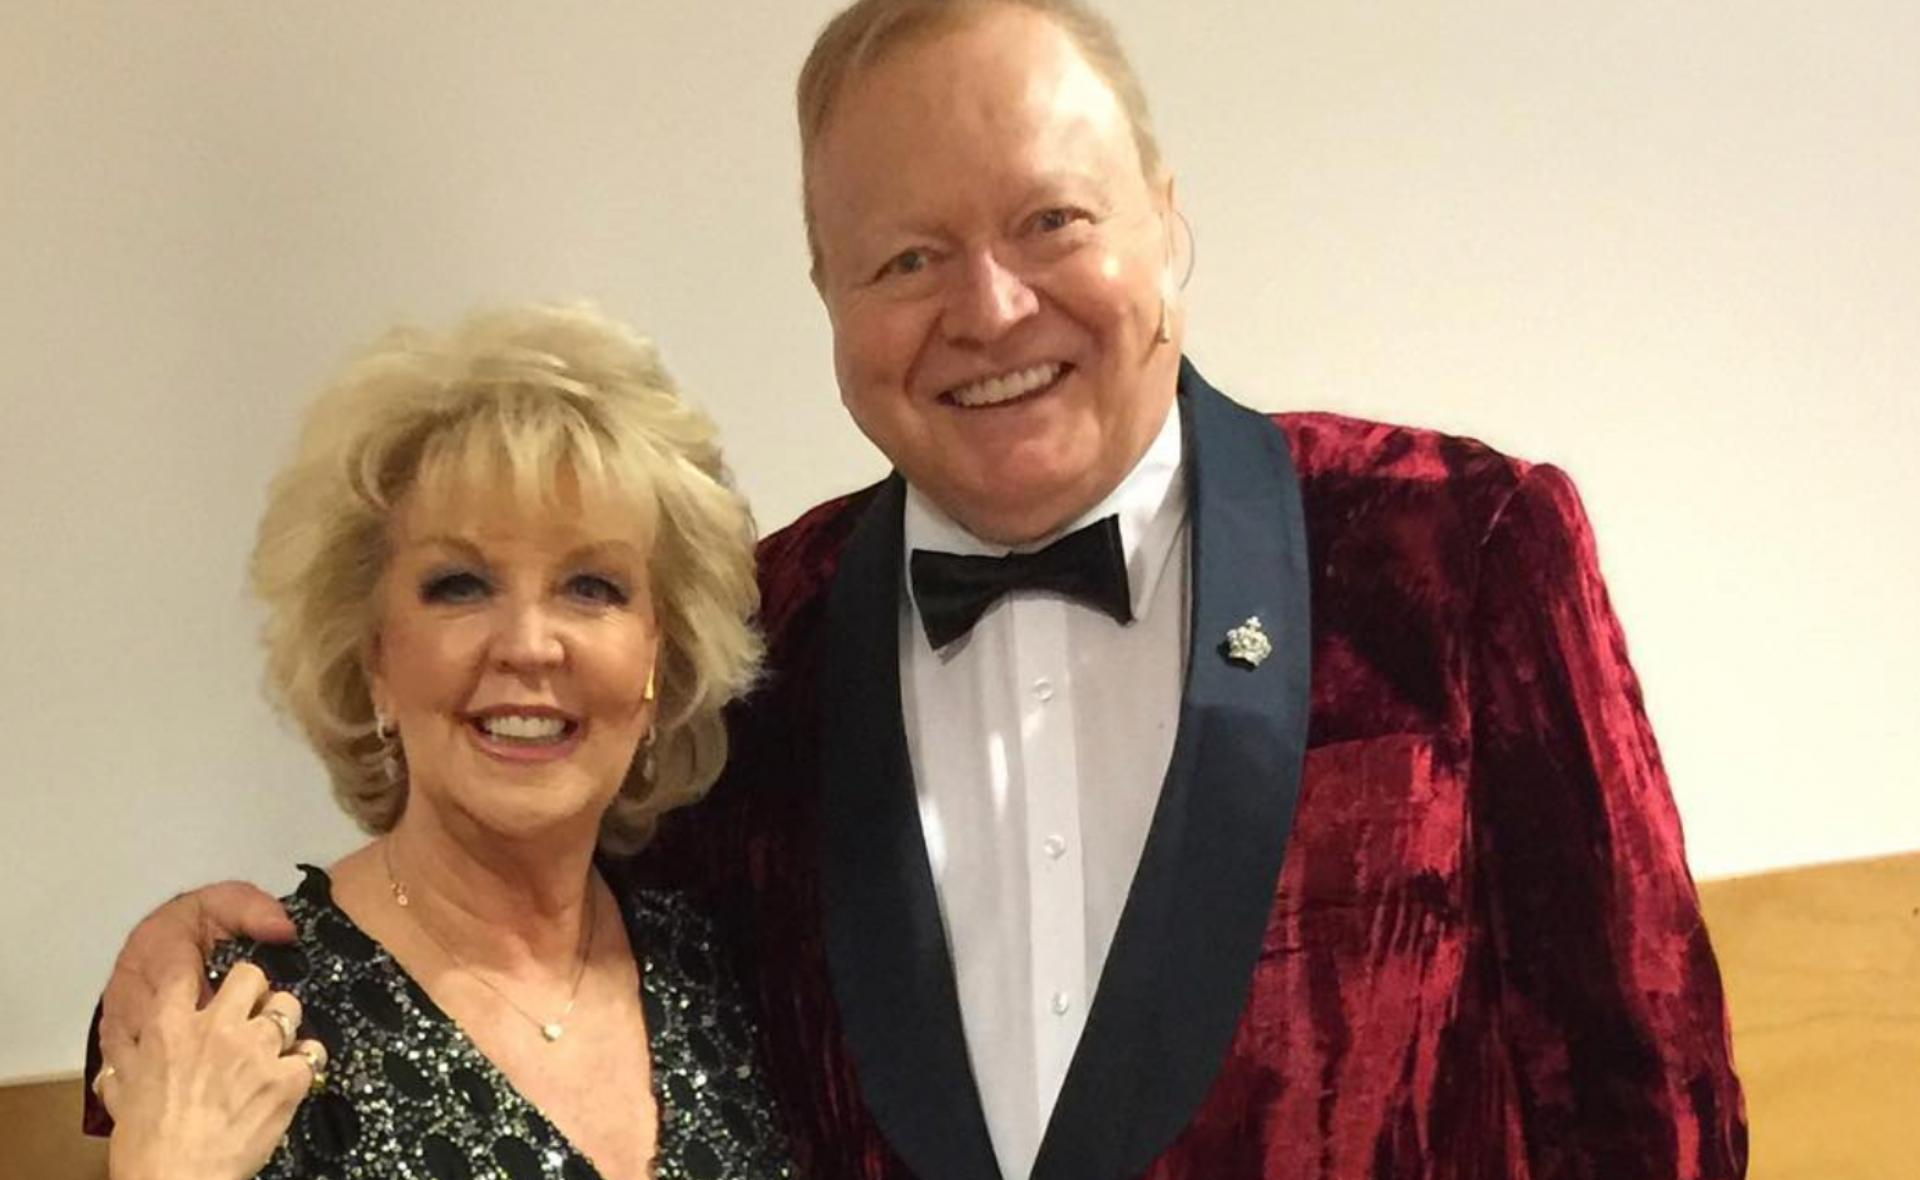 “I think I just loved him too much”: Patti Newton shares loving tribute to her late husband, Bert Newton